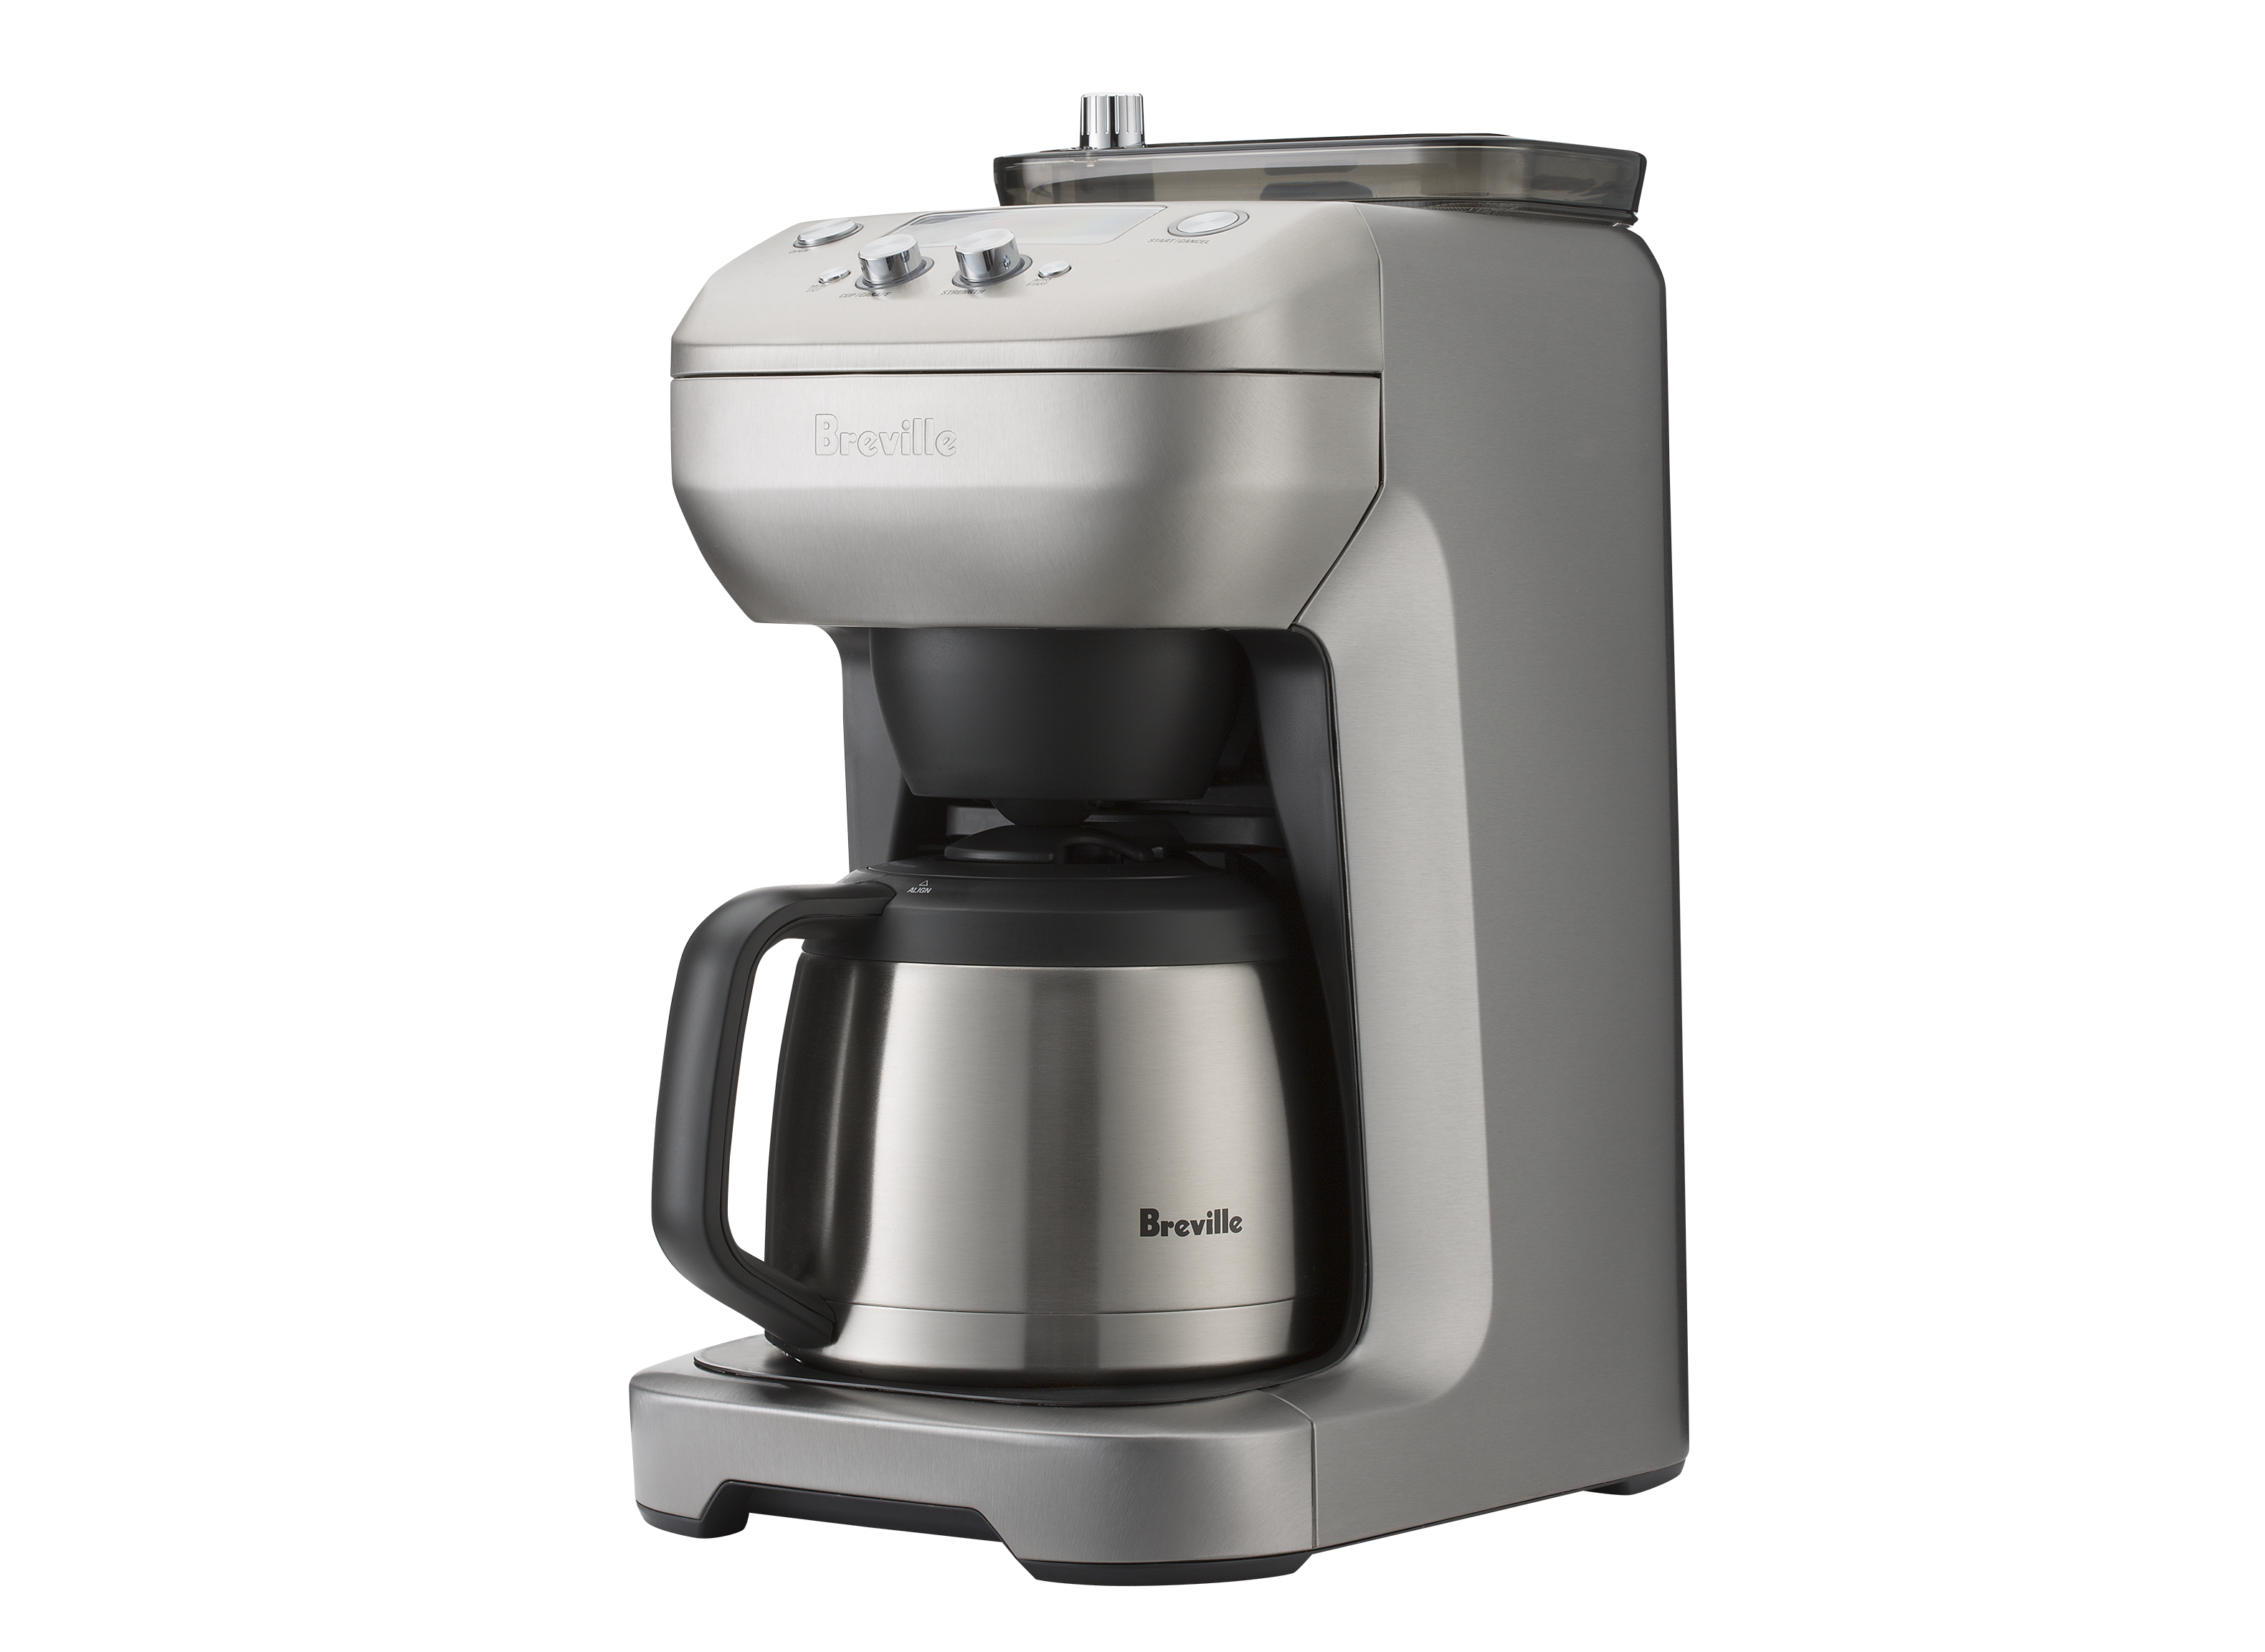 https://crdms.images.consumerreports.org/prod/products/cr/models/383621-coffeemakers-breville-thegrindcontrolbdc650bss.png